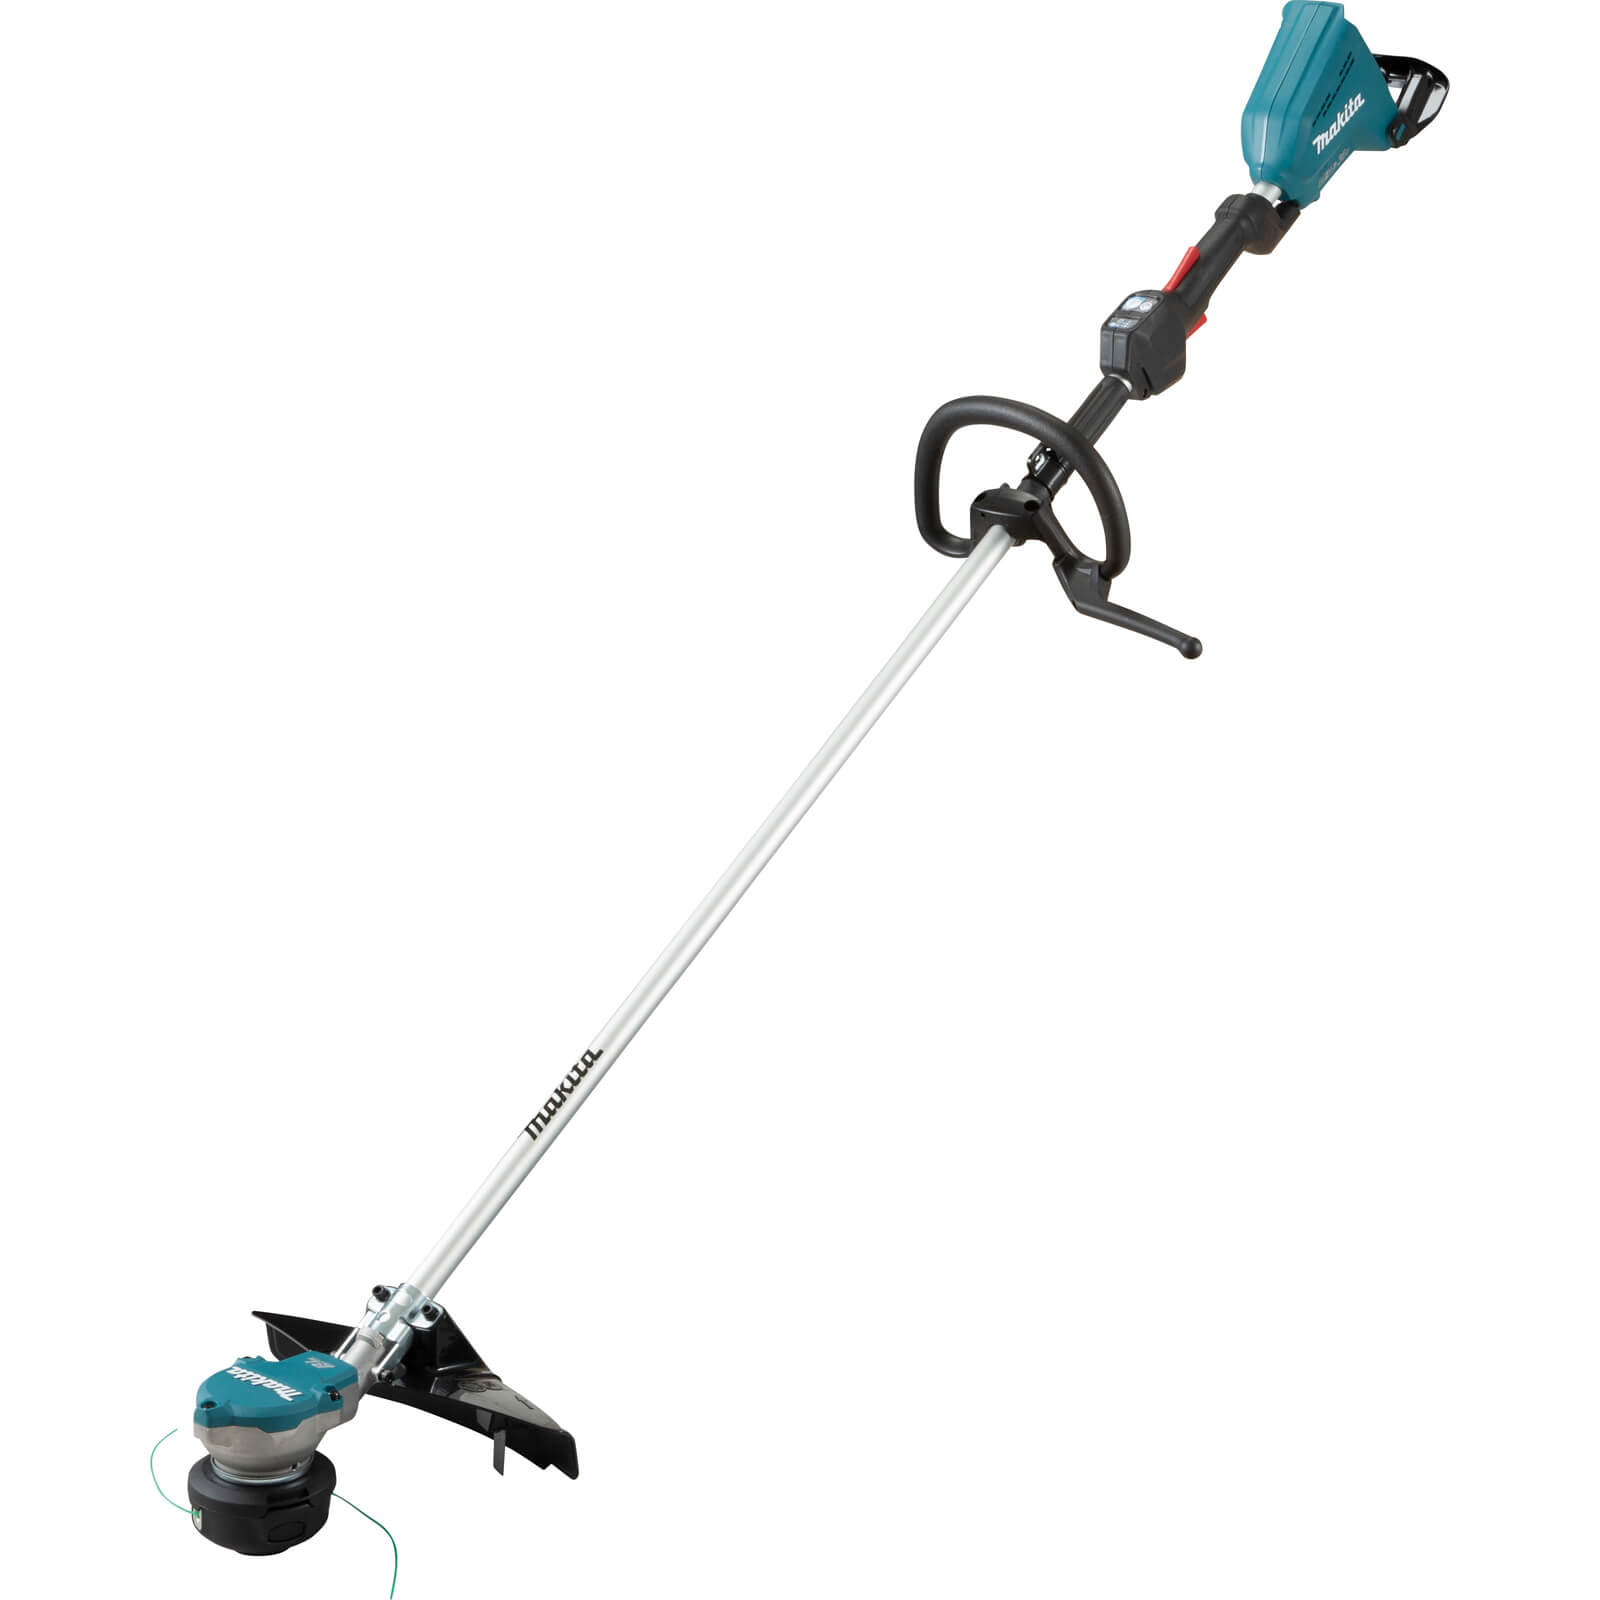 Image of Makita DUR368L Twin 18v LXT Cordless Brushless Grass Trimmer 350mm No Batteries No Charger